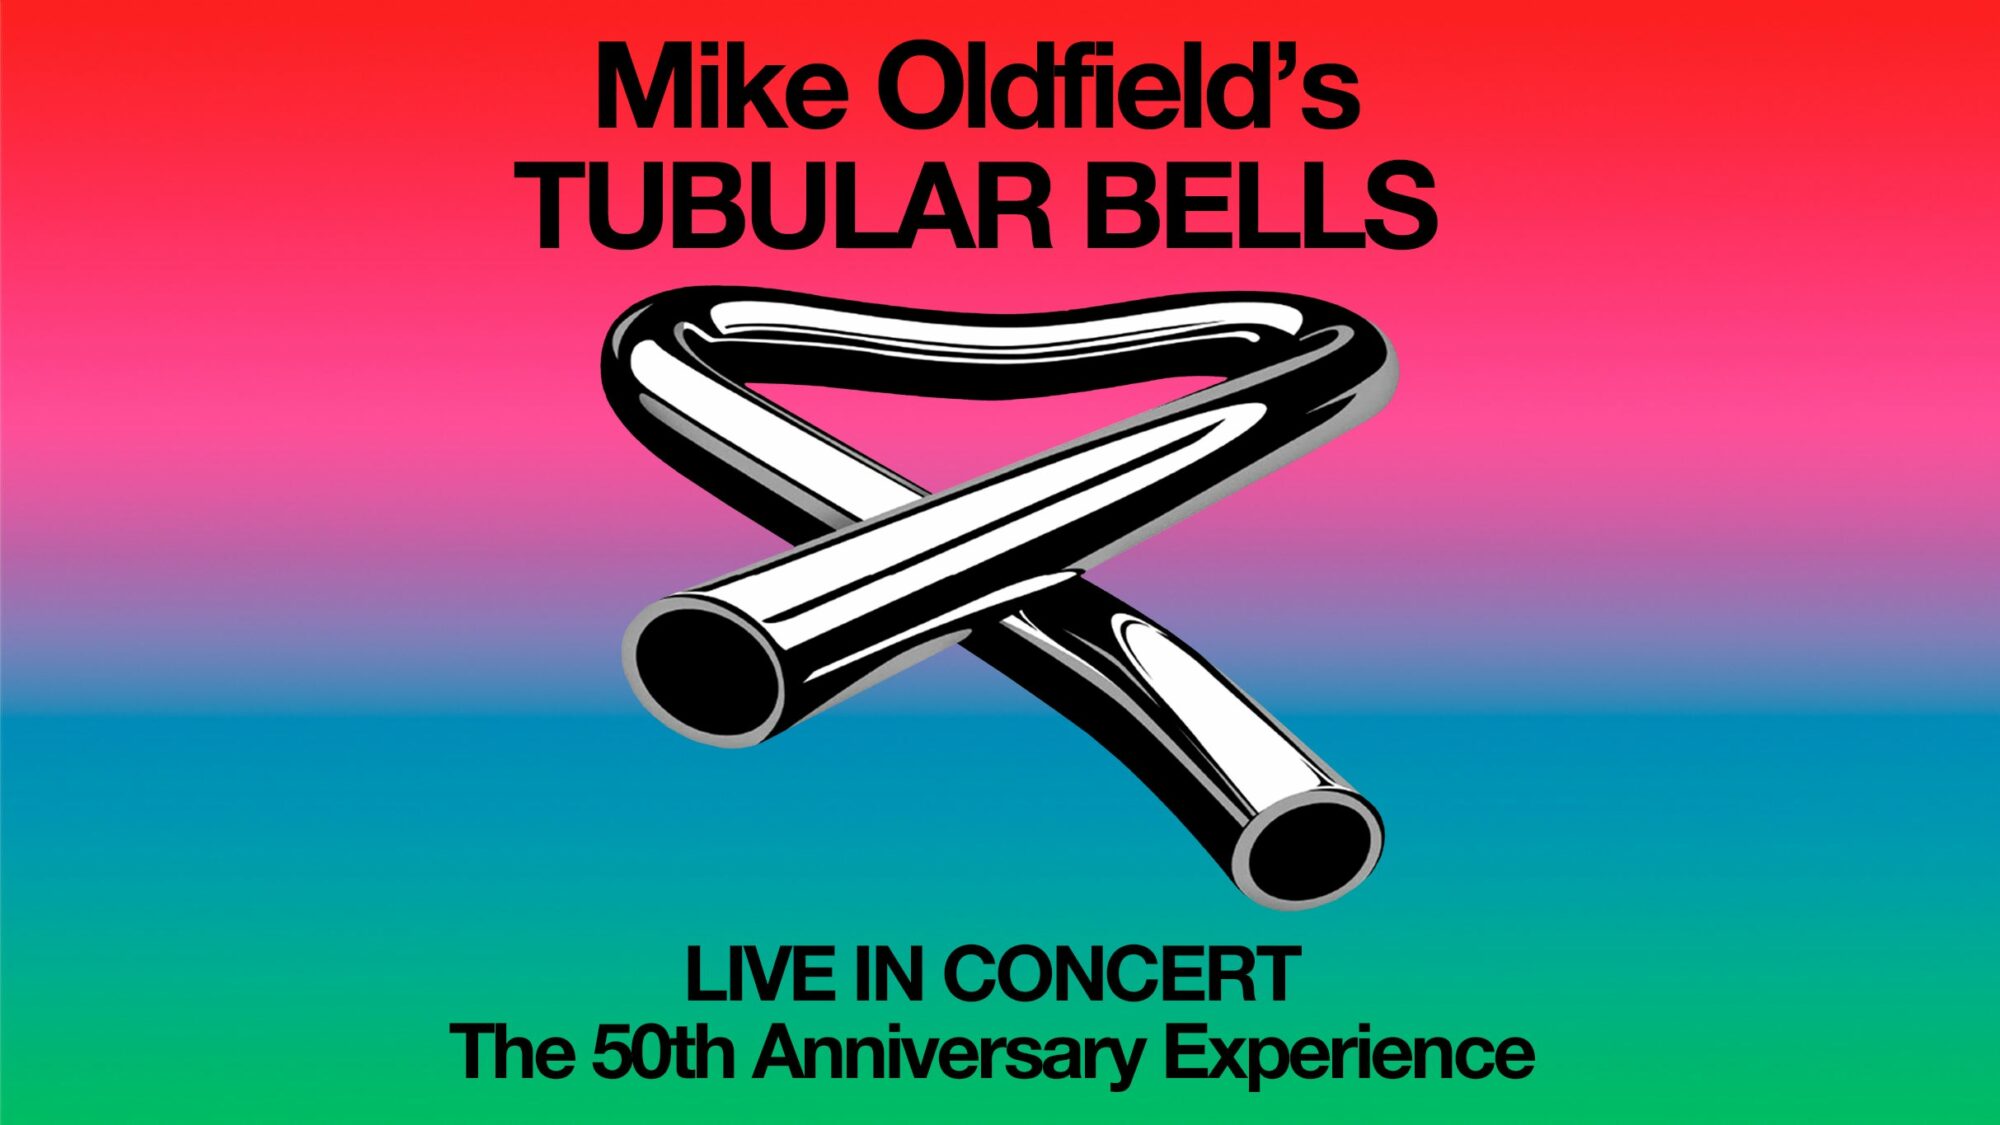 Image name Mike Oldfields Tubular Bells 50th Anniversary Tour at Sheffield City Hall Oval Hall Sheffield the 1 image from the post Mike Oldfield's Tubular Bells: 50th Anniversary Tour at Sheffield City Hall Oval Hall, Sheffield in Yorkshire.com.